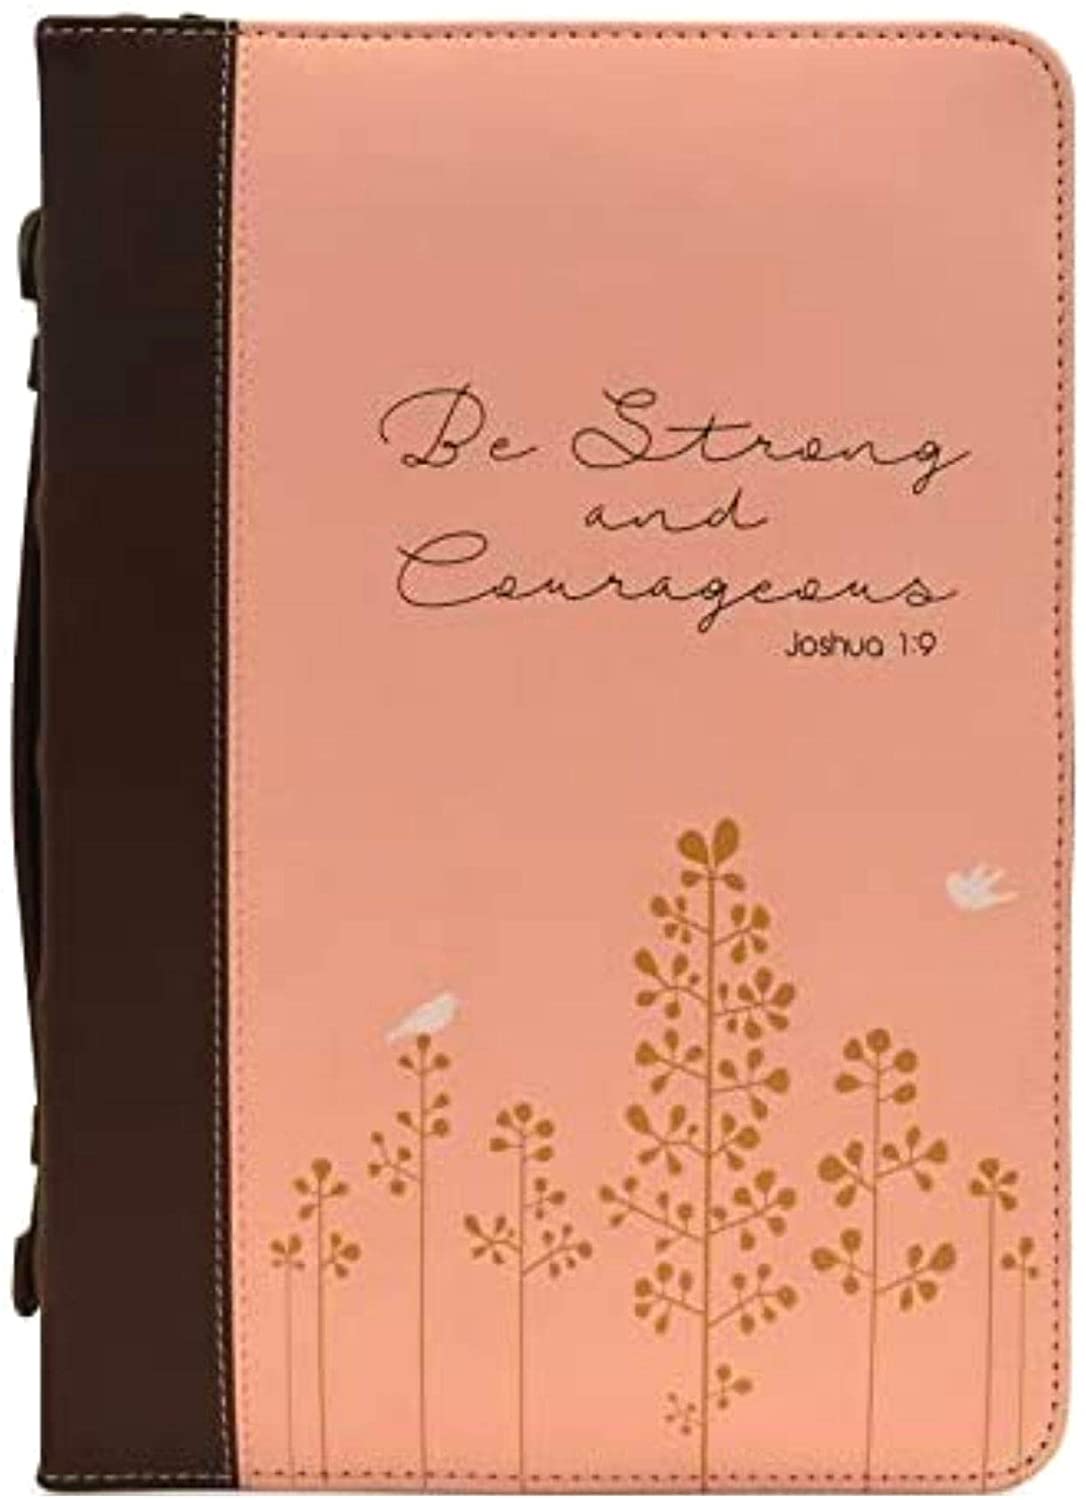 Women's Bible Cover, "Be Strong and Courageous- Joshua 1:9"